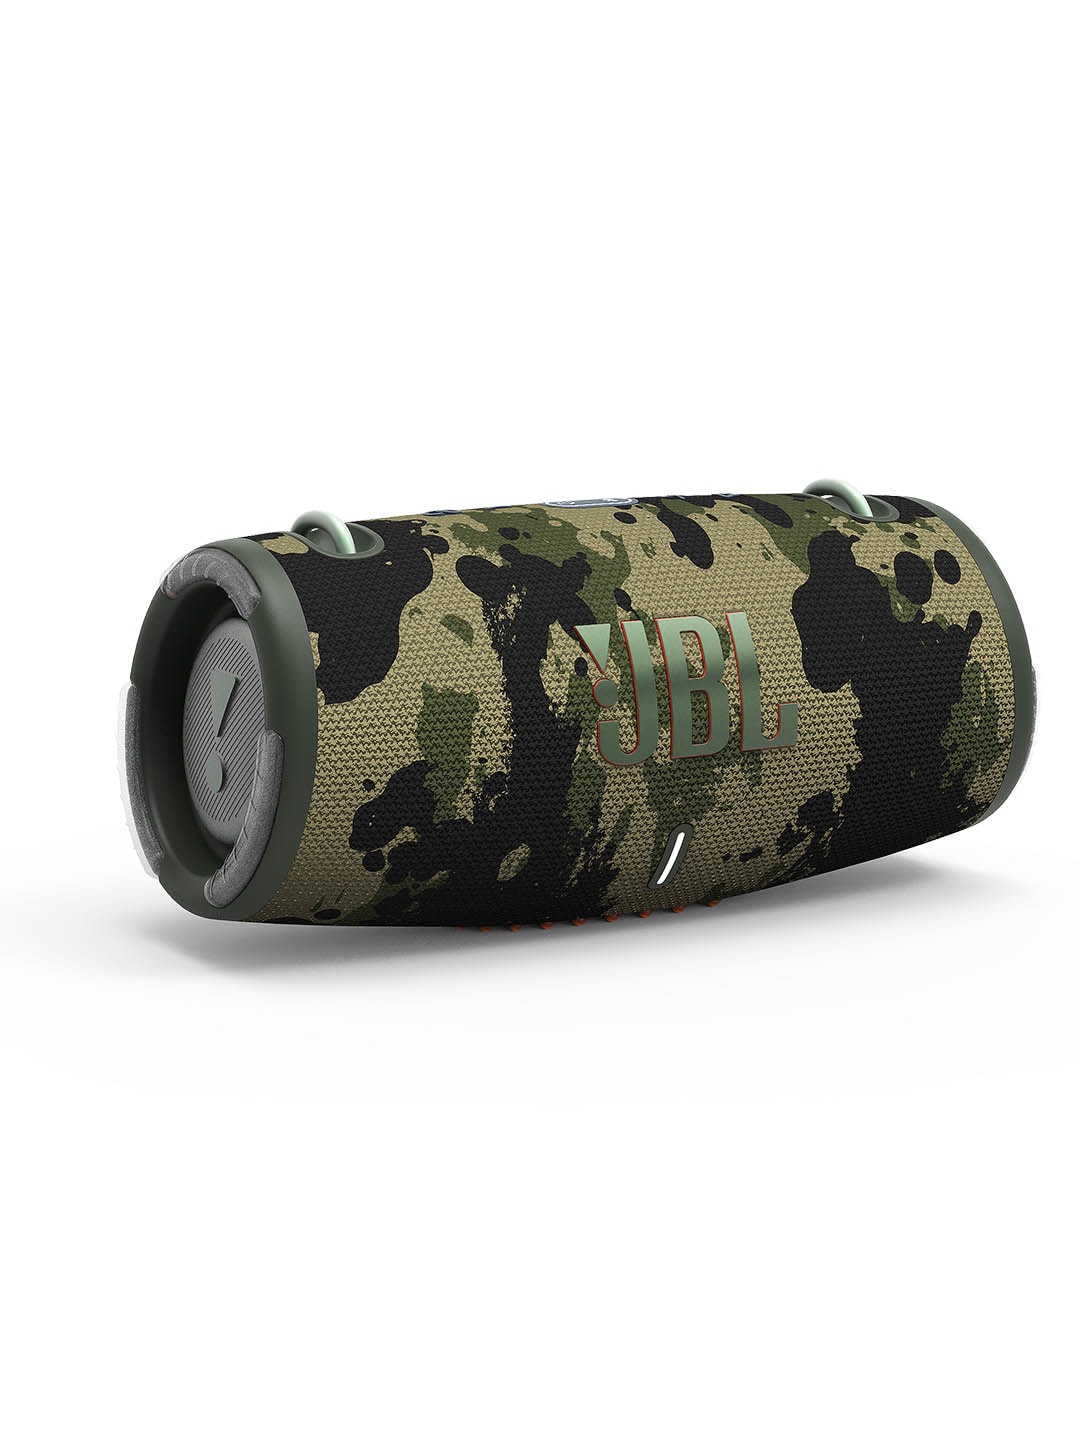 JBL Xtreme 3 Wireless Portable Bluetooth Speaker Without Mic - Olive Green Price in India